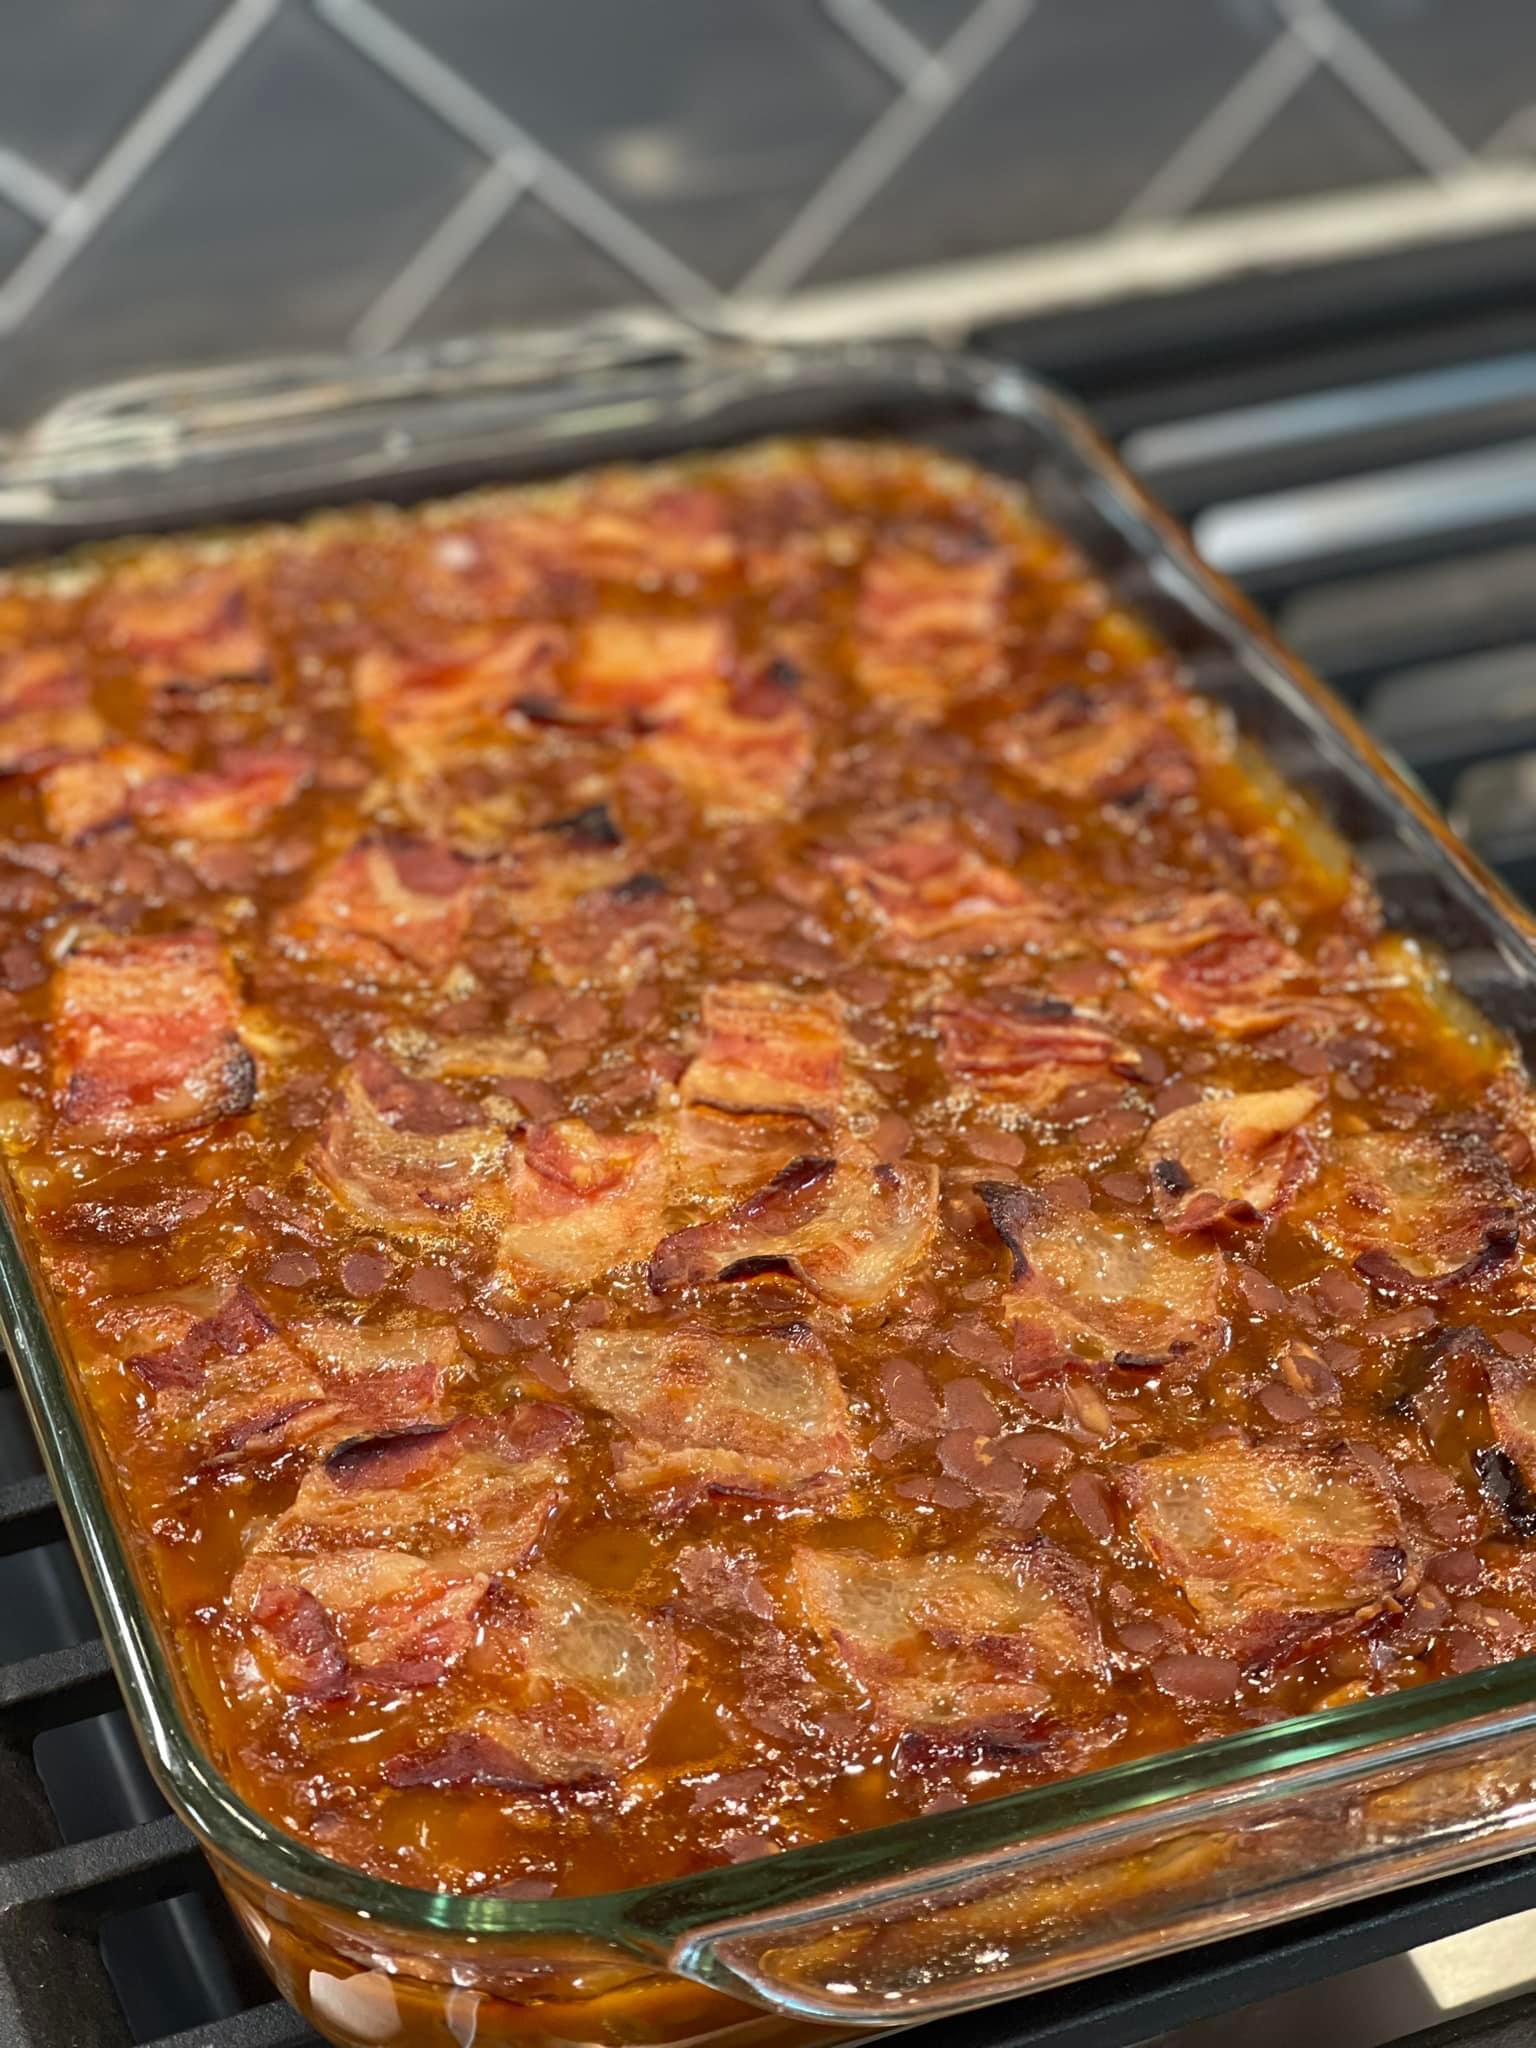 BBQ baked beans topped with bacon and baked in a glass 9x13 baking pan.